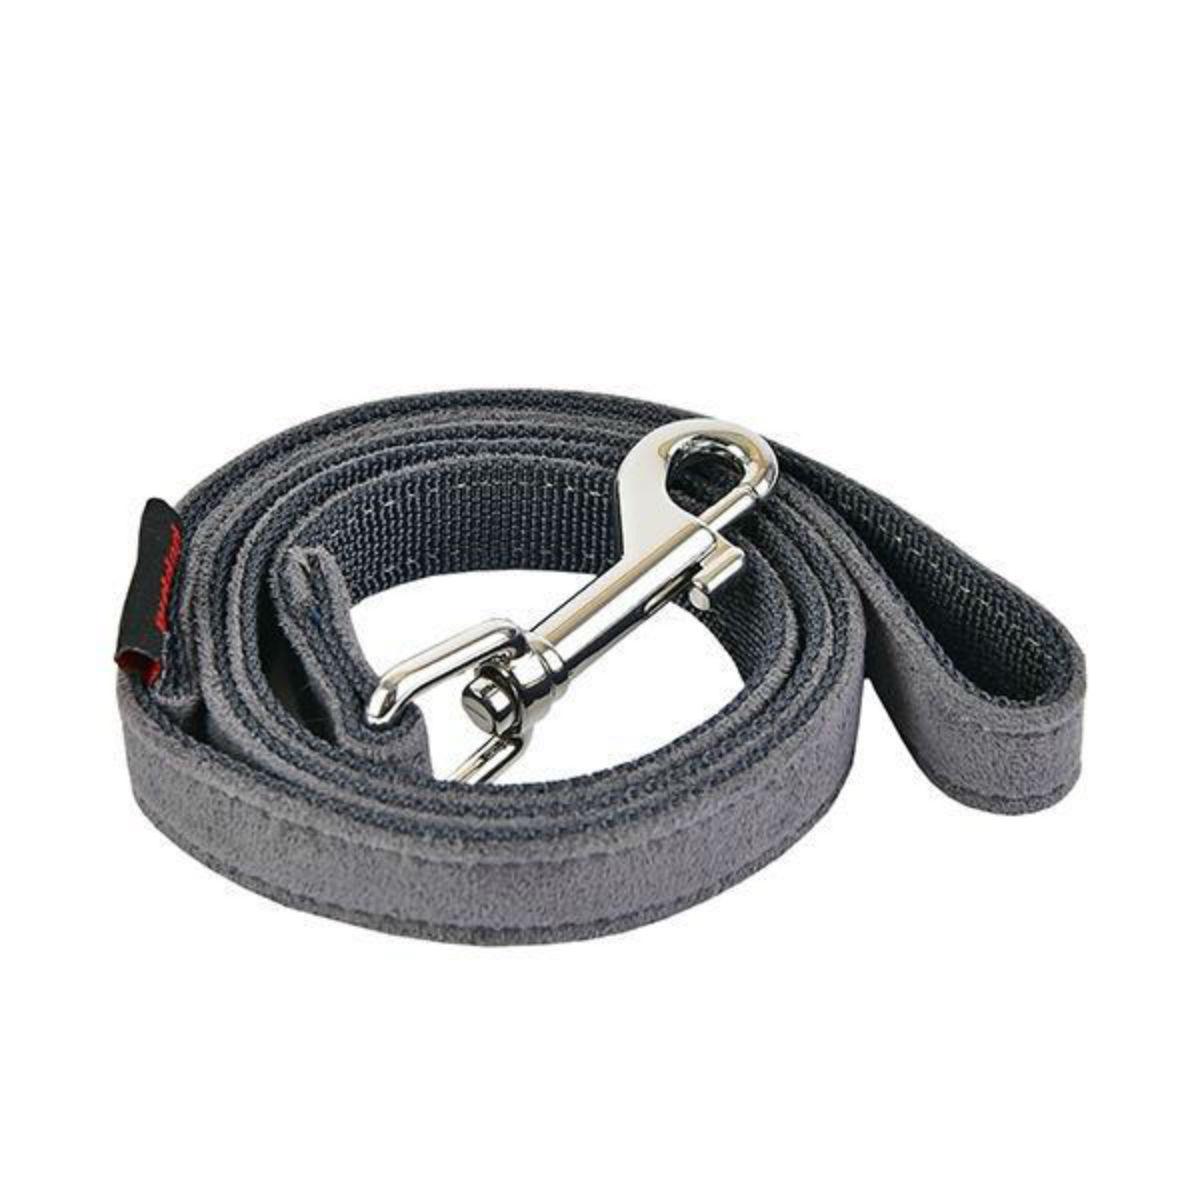 Terry Dog Leash by Puppia - Gray